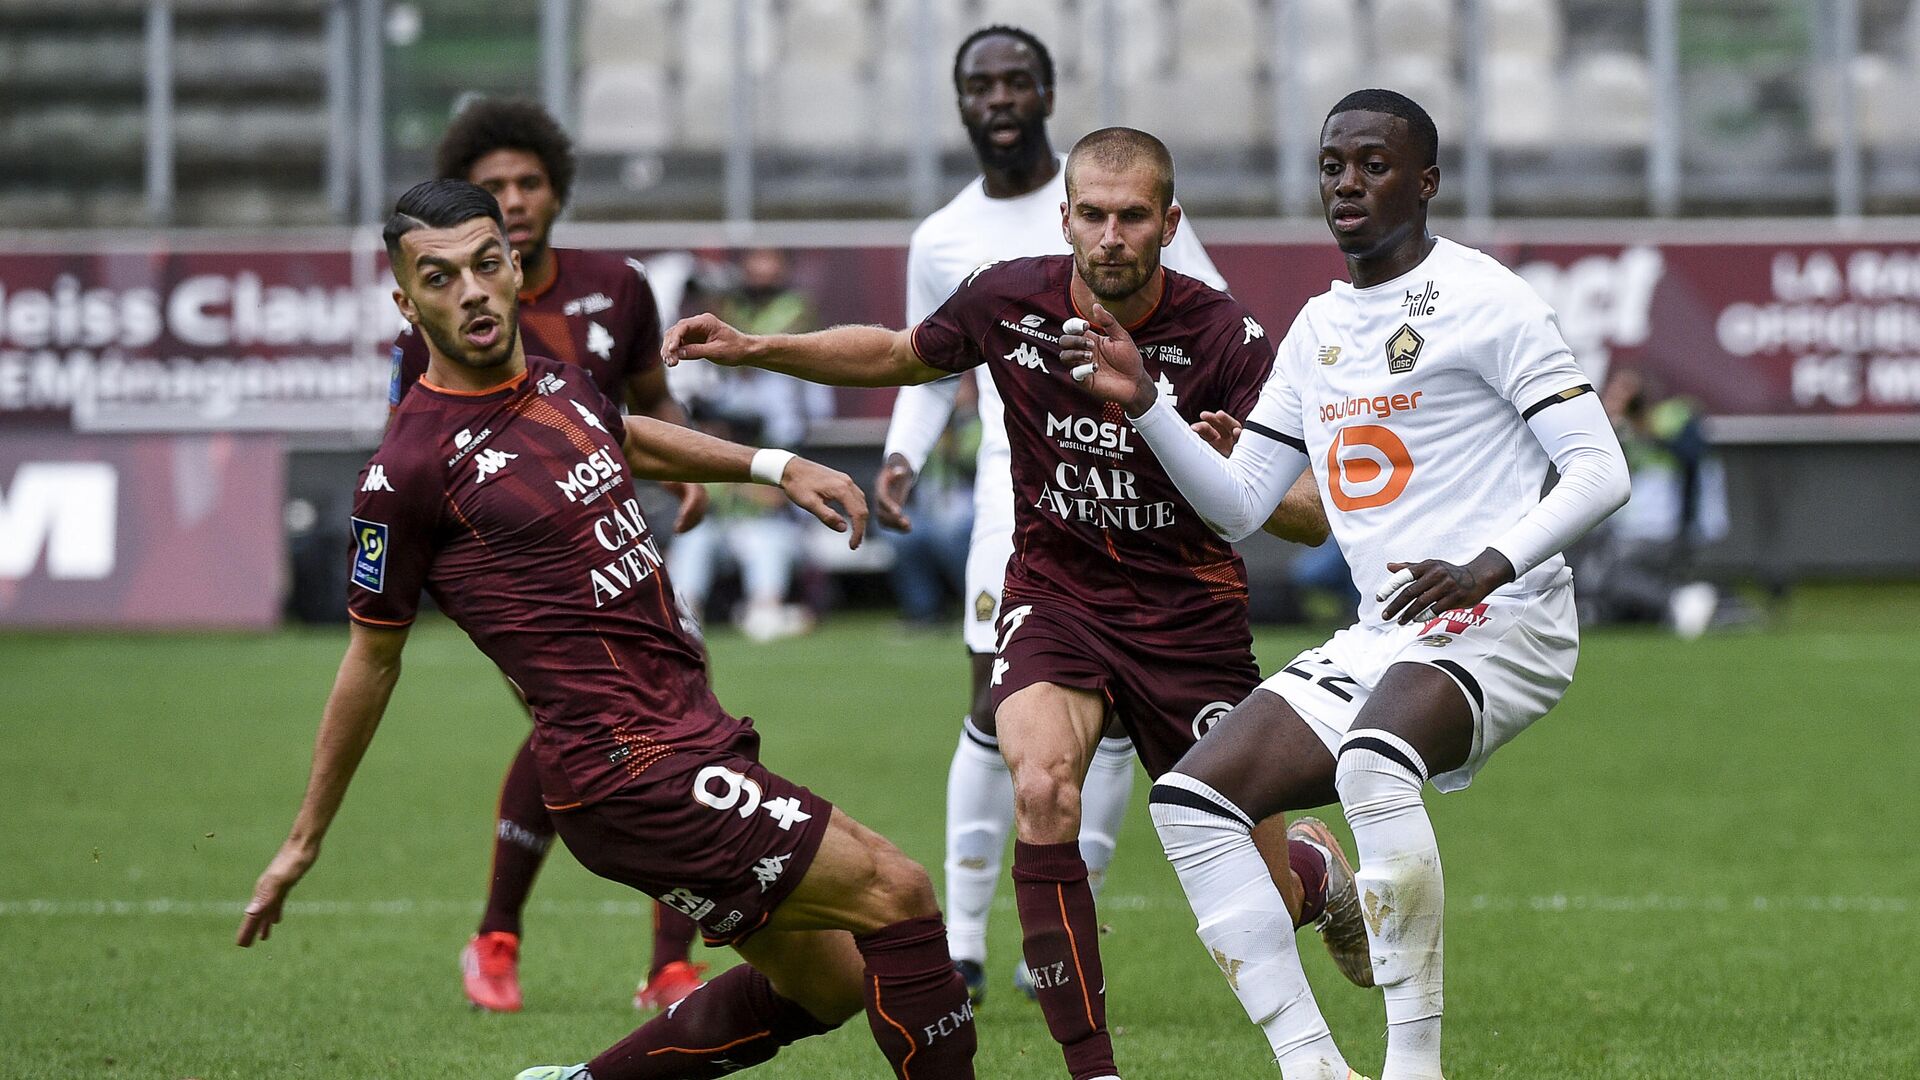 (From L) Metz's French forward Georges Mikautadze and Metz's Senegalese forward Ibrahima Niane fight for the ball with Lille's US forward Timothy Weah during the French L1 football match between FC Metz and Lille OSC at Stade Saint-Symphorien in Longeville-les-Metz, northern France, on August 8, 2021. (Photo by JEAN-CHRISTOPHE VERHAEGEN / AFP) - РИА Новости, 1920, 08.08.2021